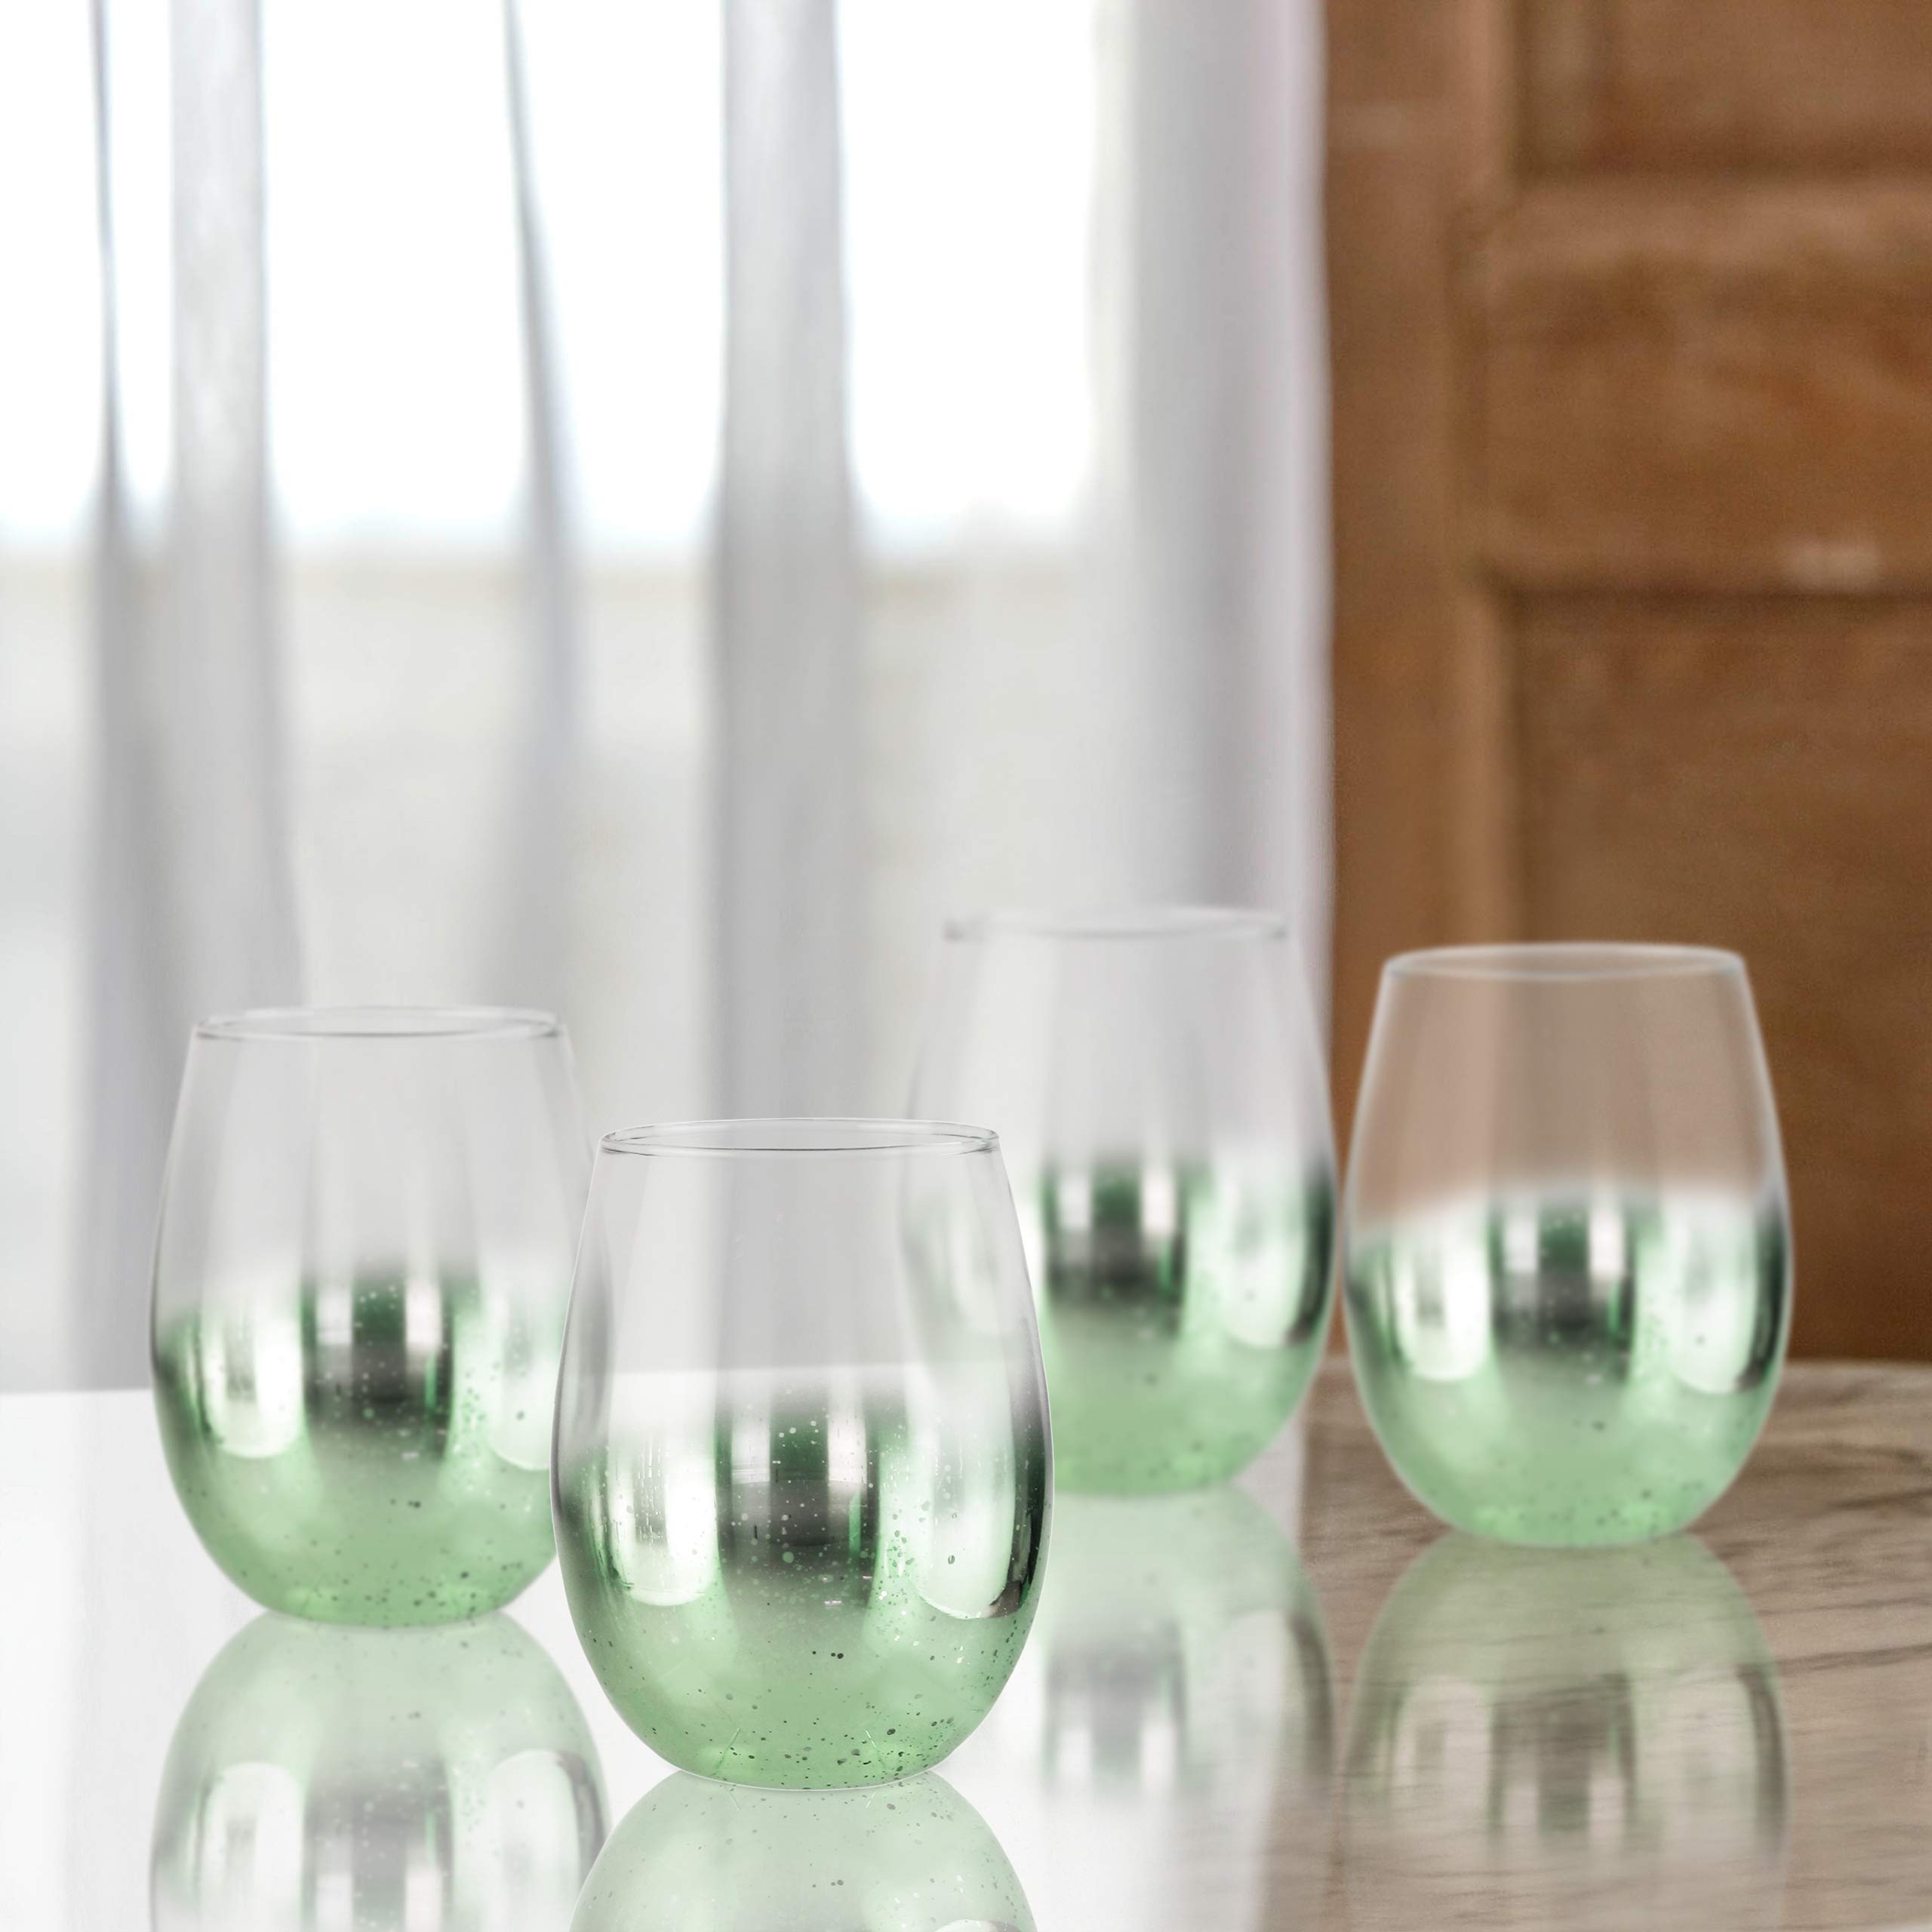 Fifth Avenue Crystal Ombre Stemless Wine Goblets-Set of 4 Elegant Lead-free Matching Drinkware For Everyday & Entertaining –Modern Glasses-Ideal Gift For Weddings & Holidays, 3.5x4.7, Green